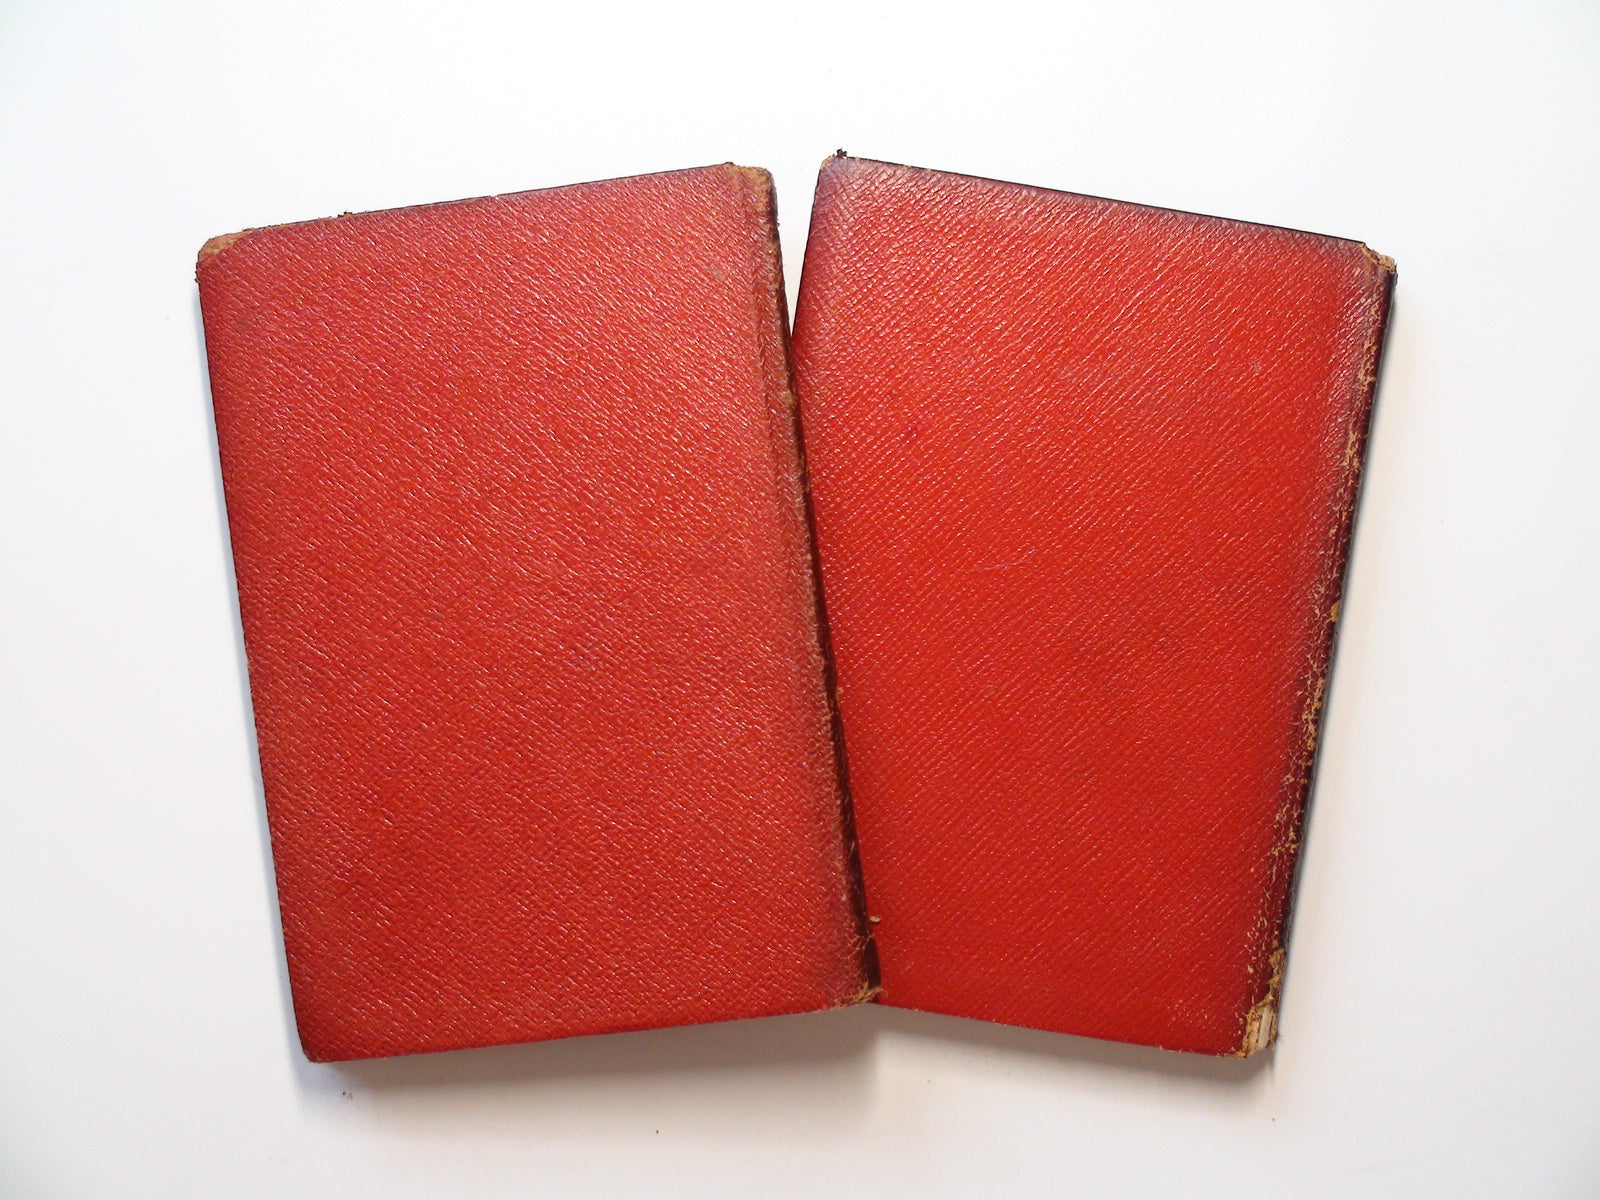 Lady Windemere's Fan, The Happy Prince, by Oscar Wilde, 2 Vols, Leather, c1910s